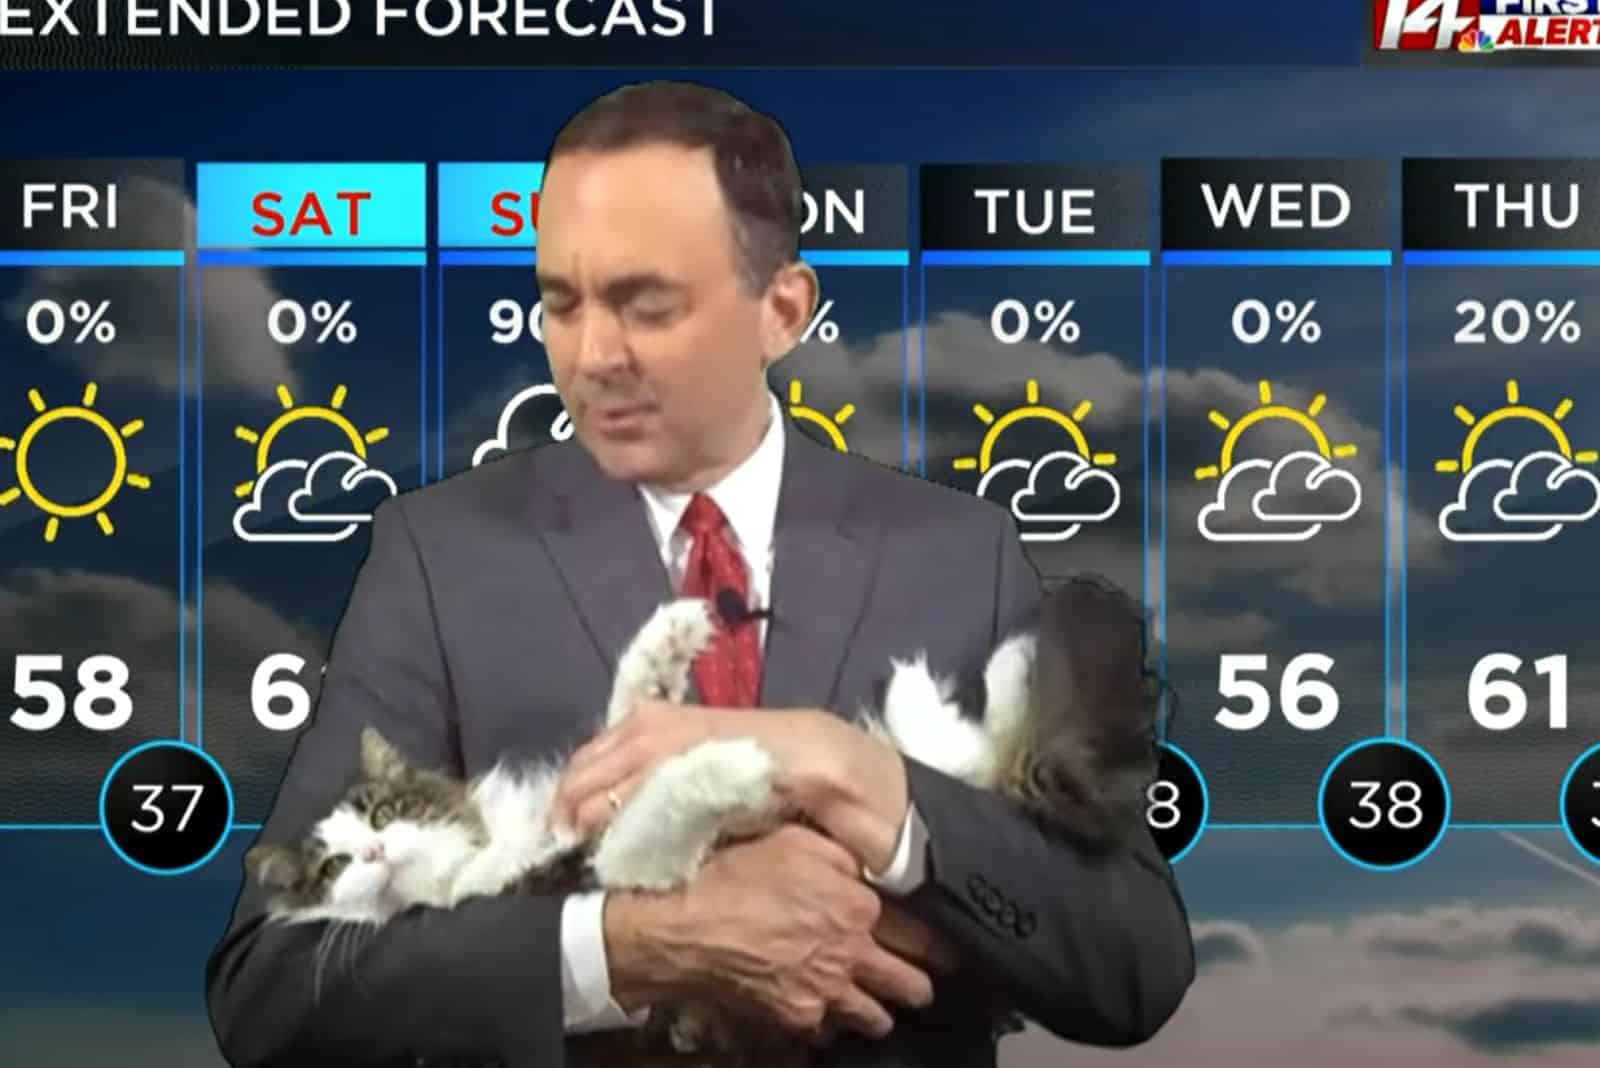 the cat interrupts the weatherman during the show